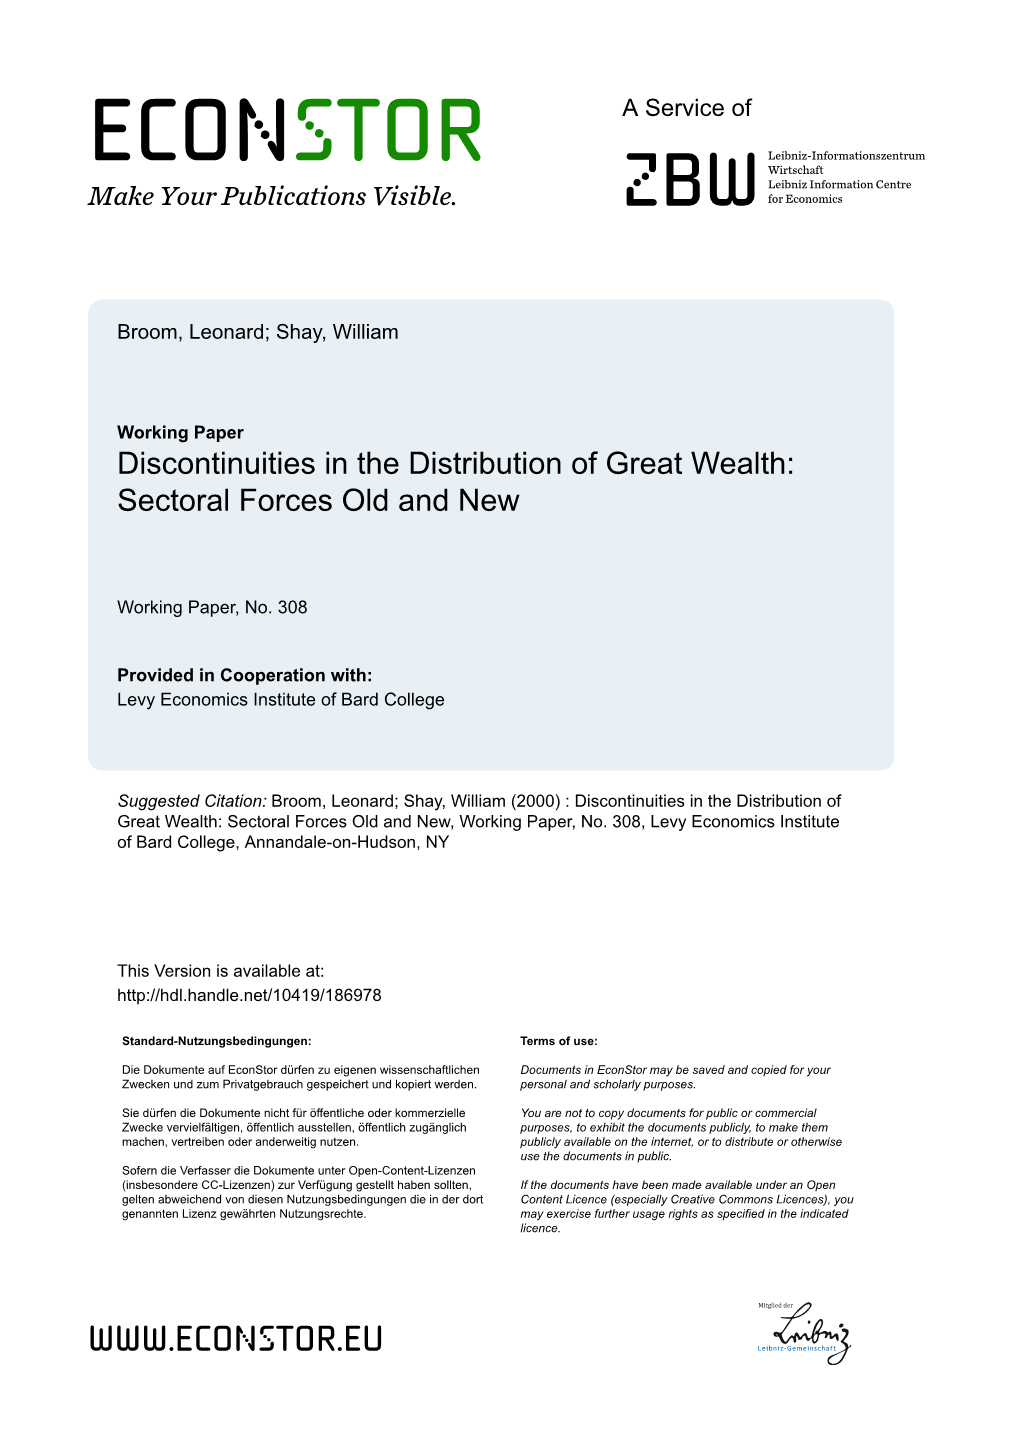 Discontinuities in the Distribution of Great Wealth: Sectoral Forces Old and New